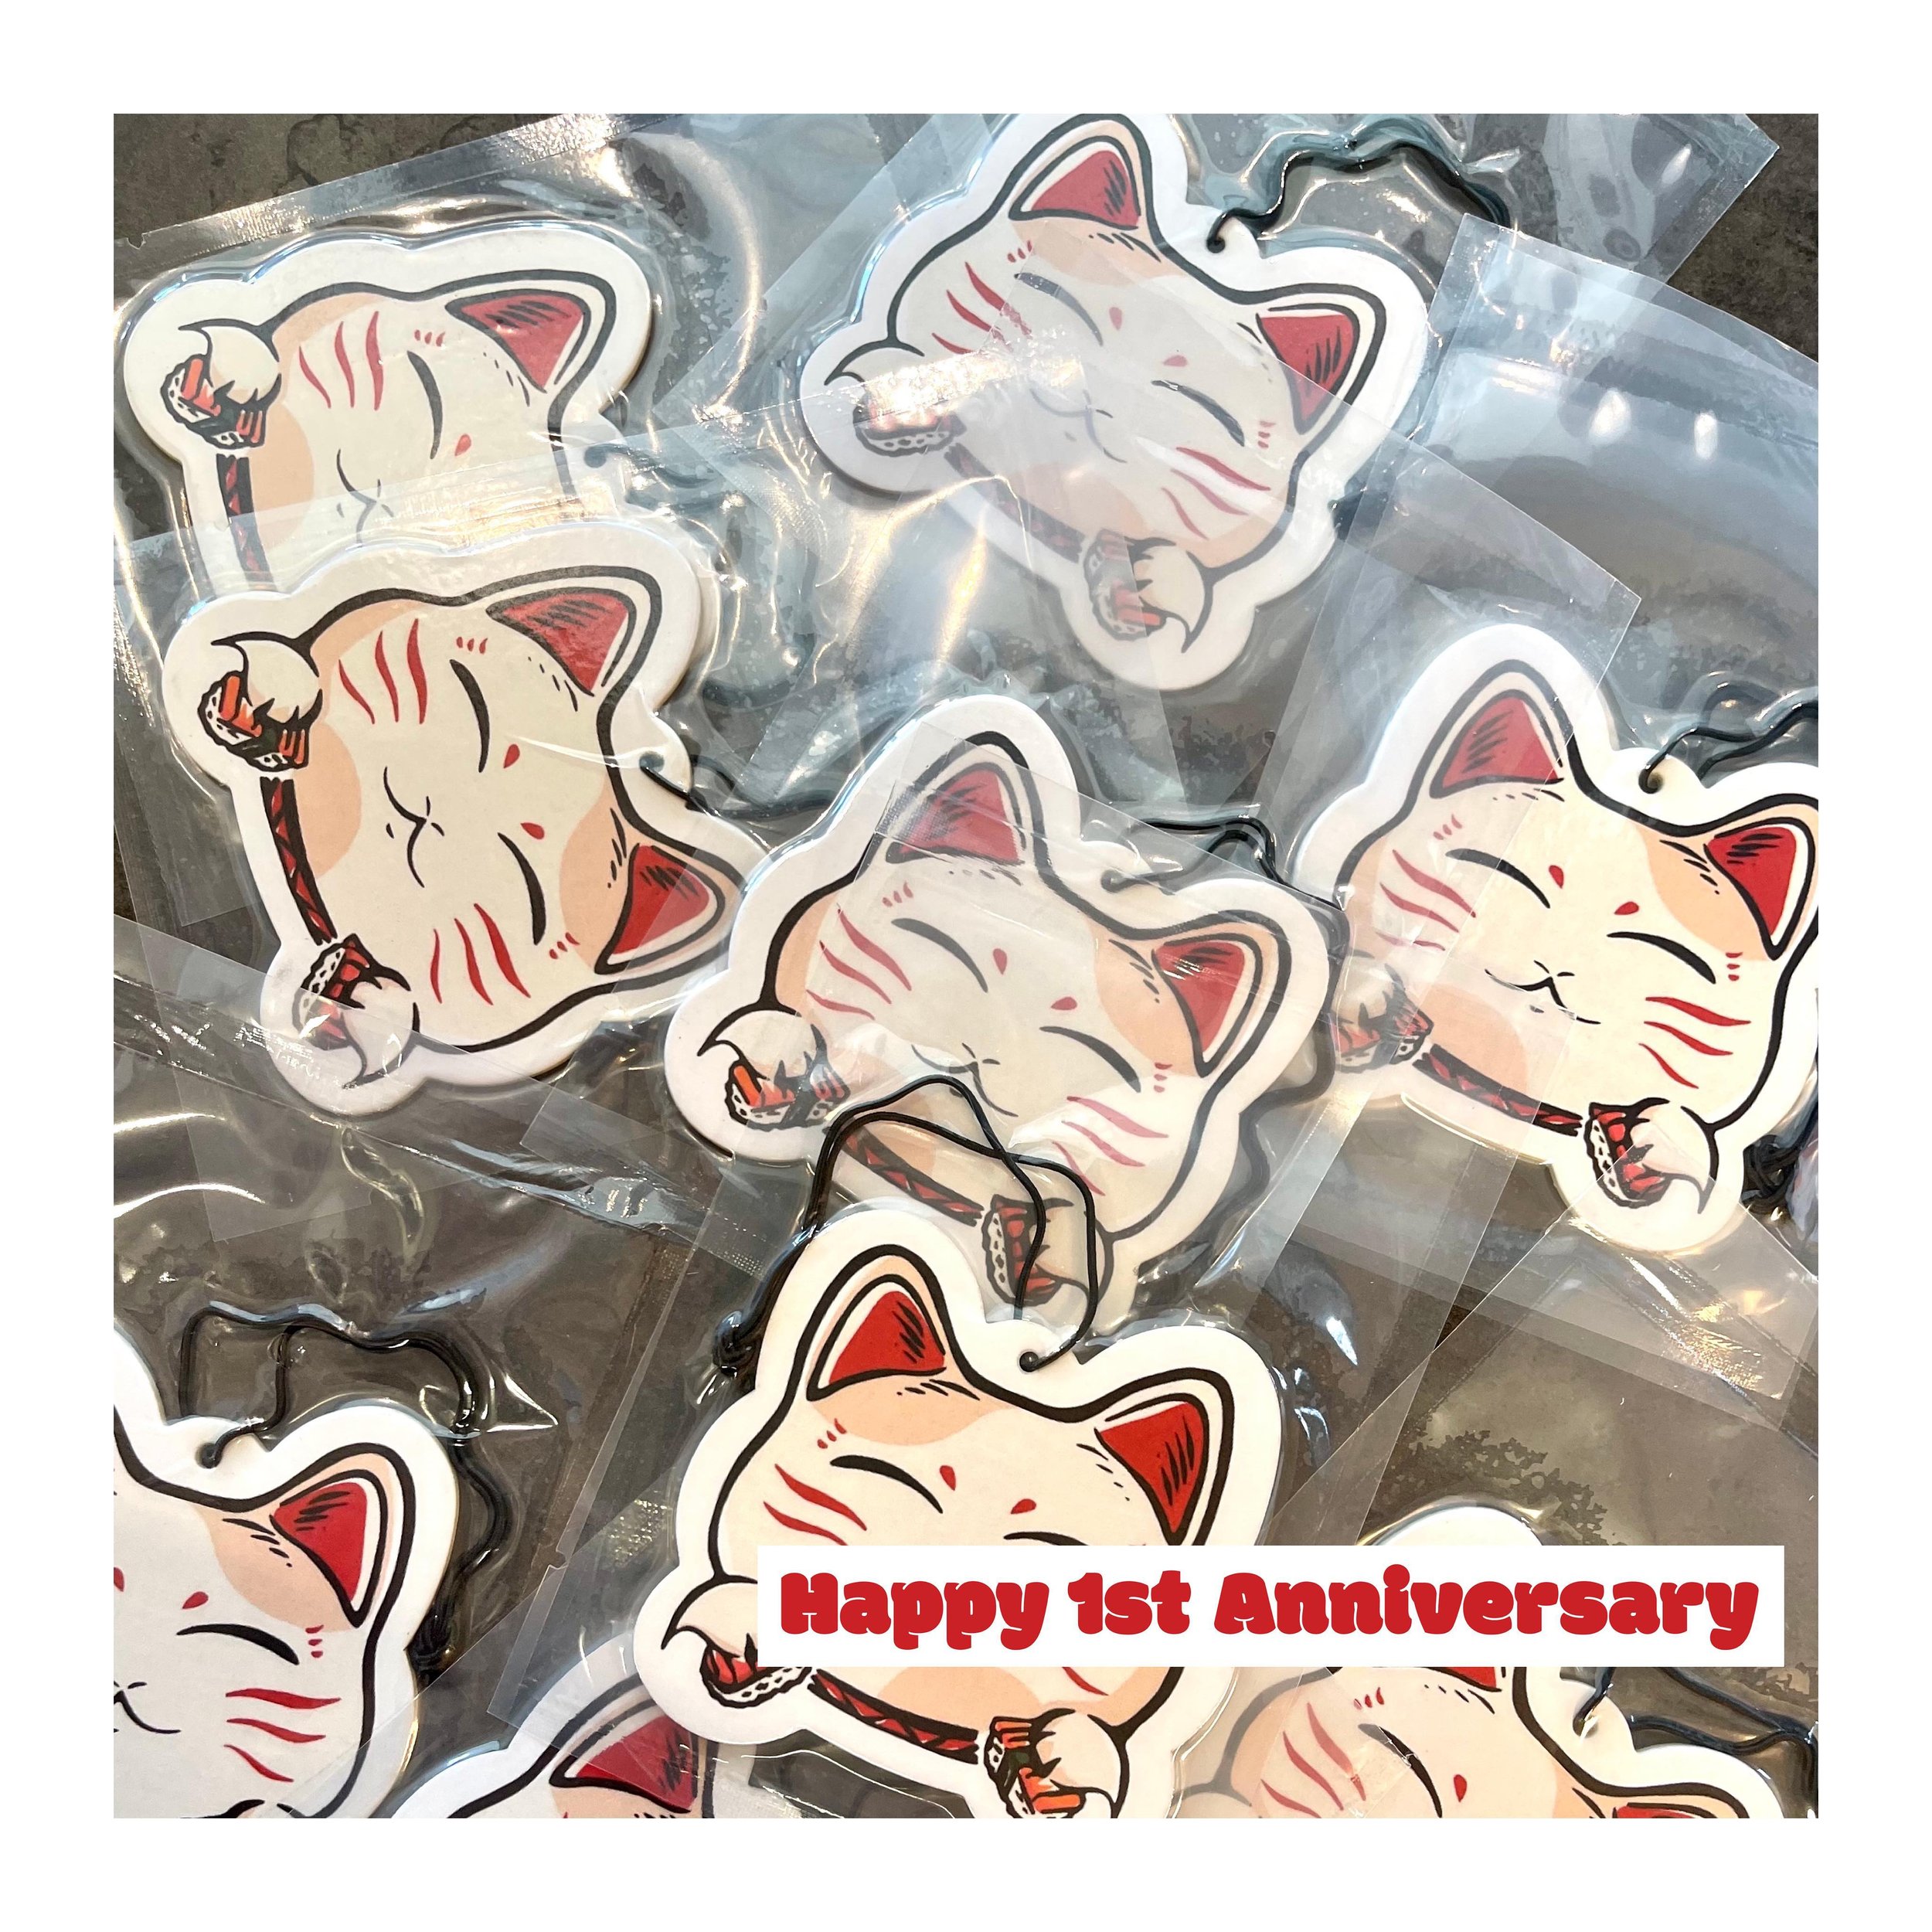 Good Morning everyone! 

We are officially open for 1️⃣ year now! Time flies and words can not explain how grateful we are for our community💚🫶

We are giving away freebies(while supplies last!) to show our appreciation if you could:

1. LIKE this p